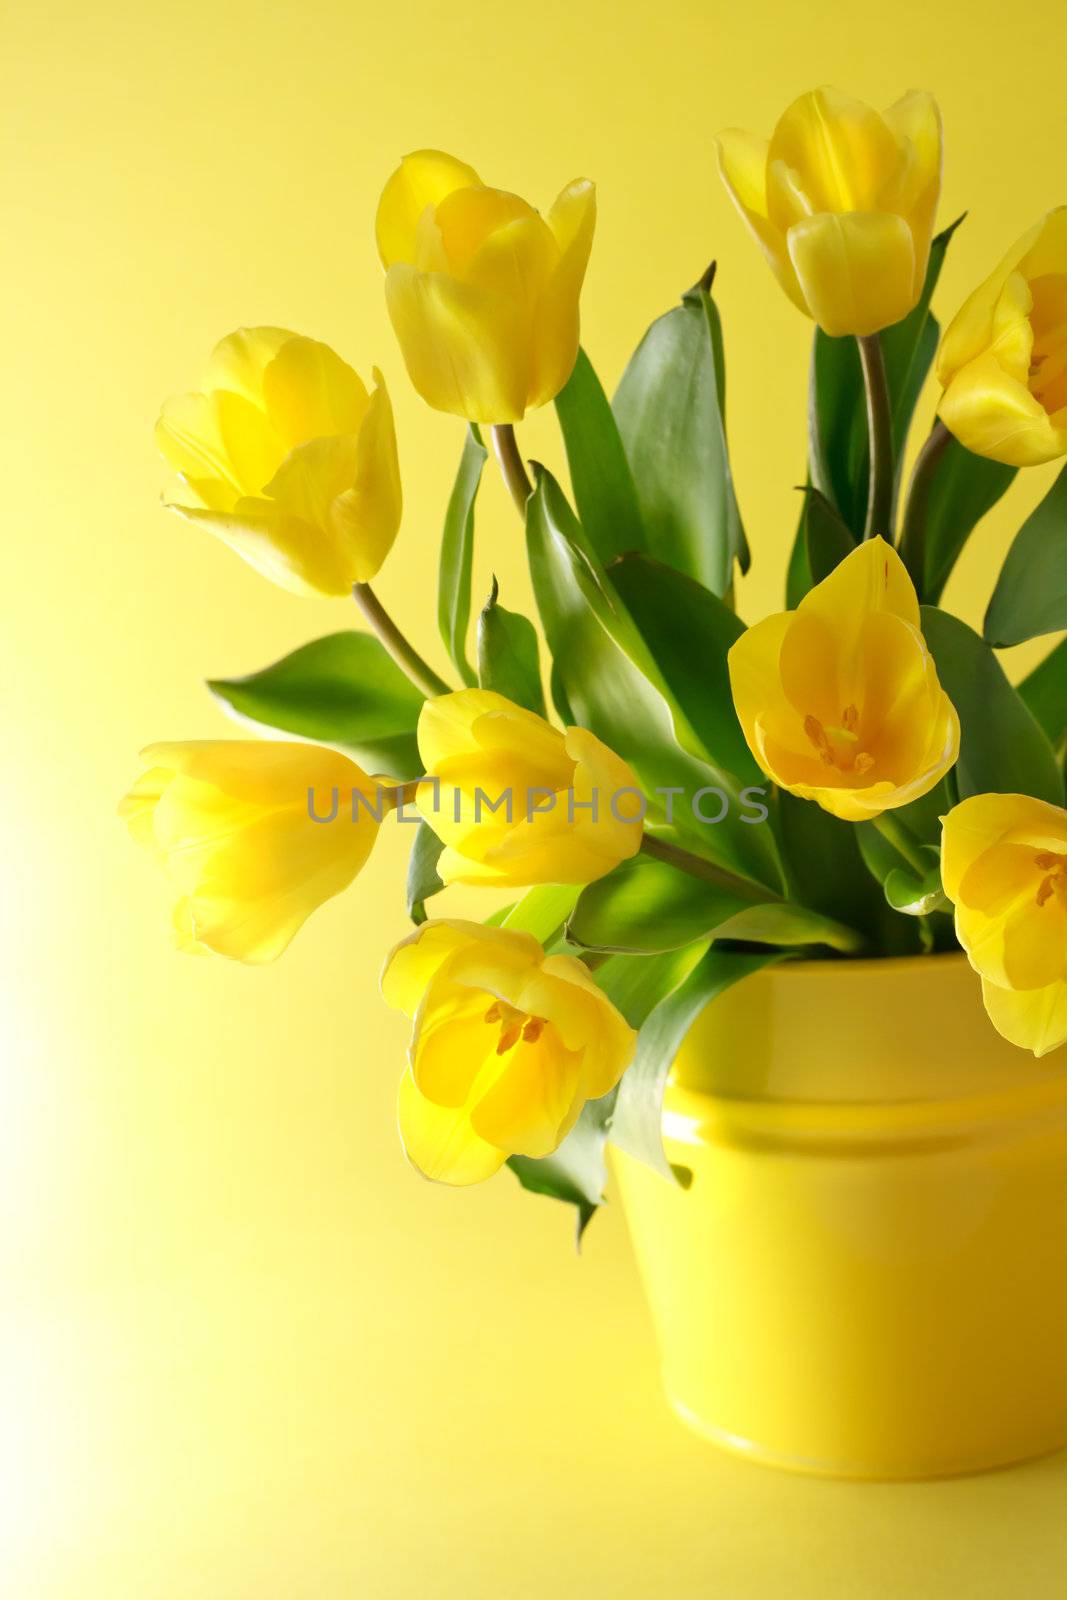 Yellow tulips on a yellow background by melpomene